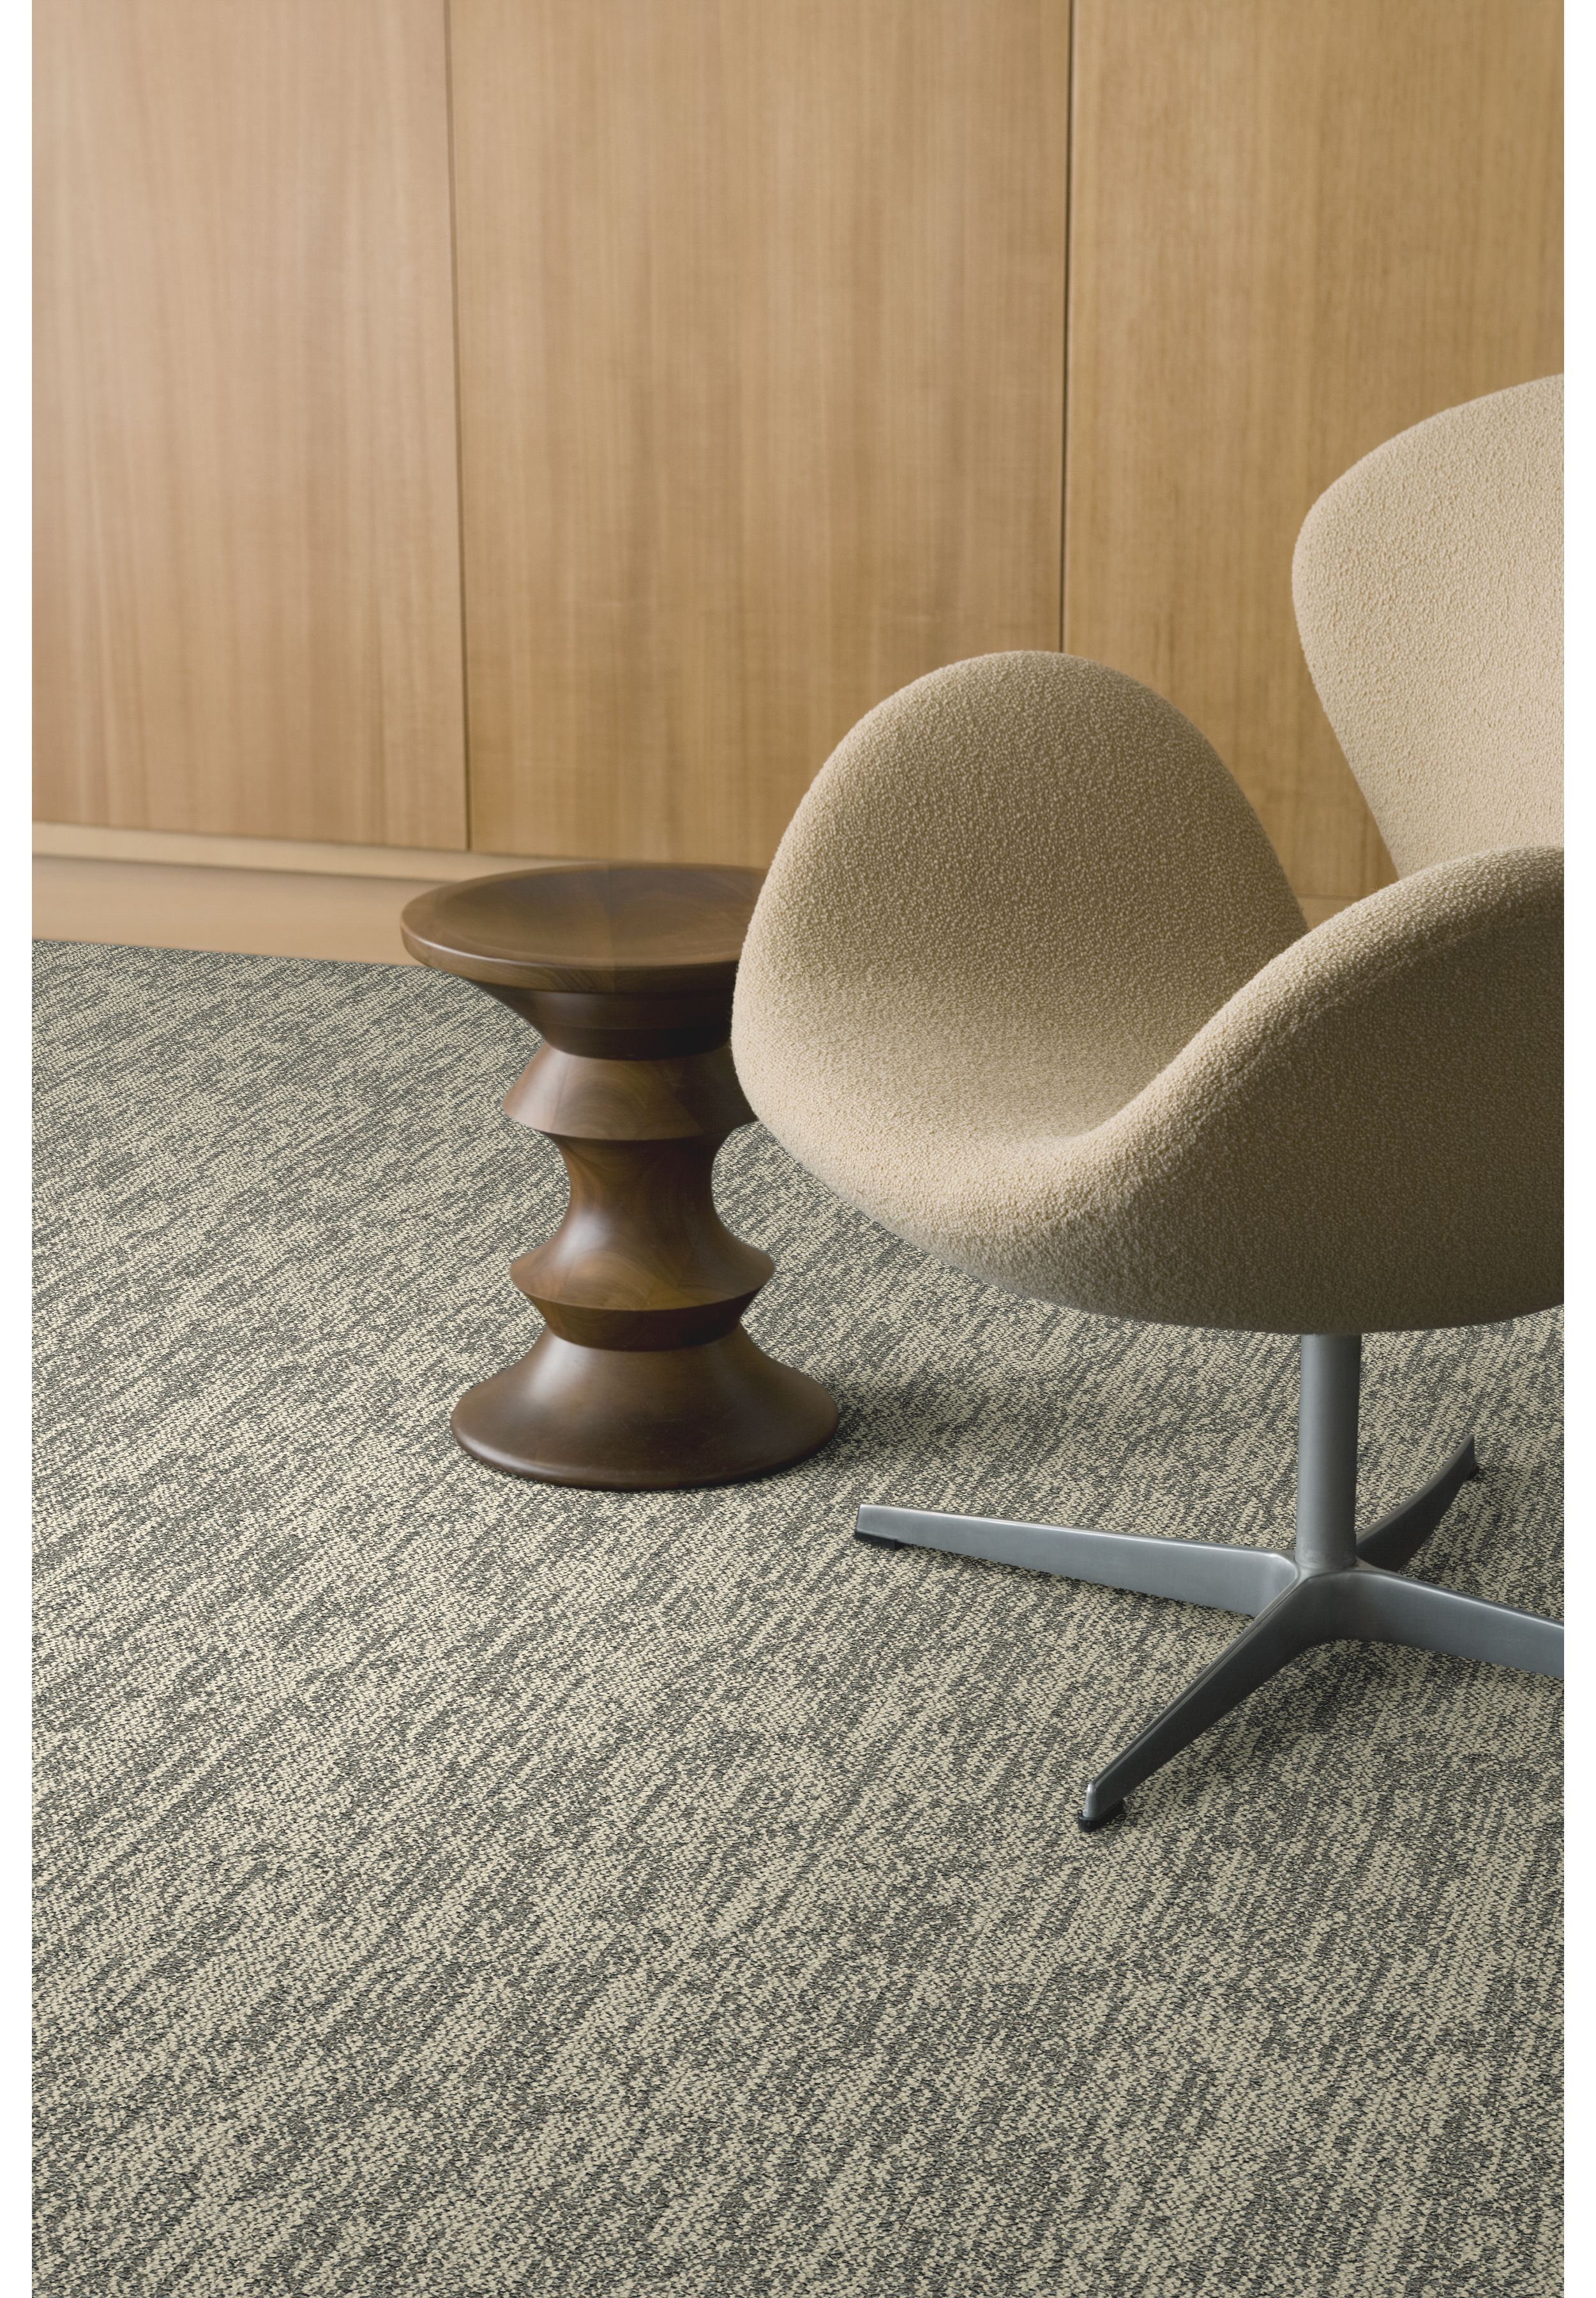 Interface Obligato plank carpet tile with textured fabric chair and small wooden art deco table numéro d’image 5